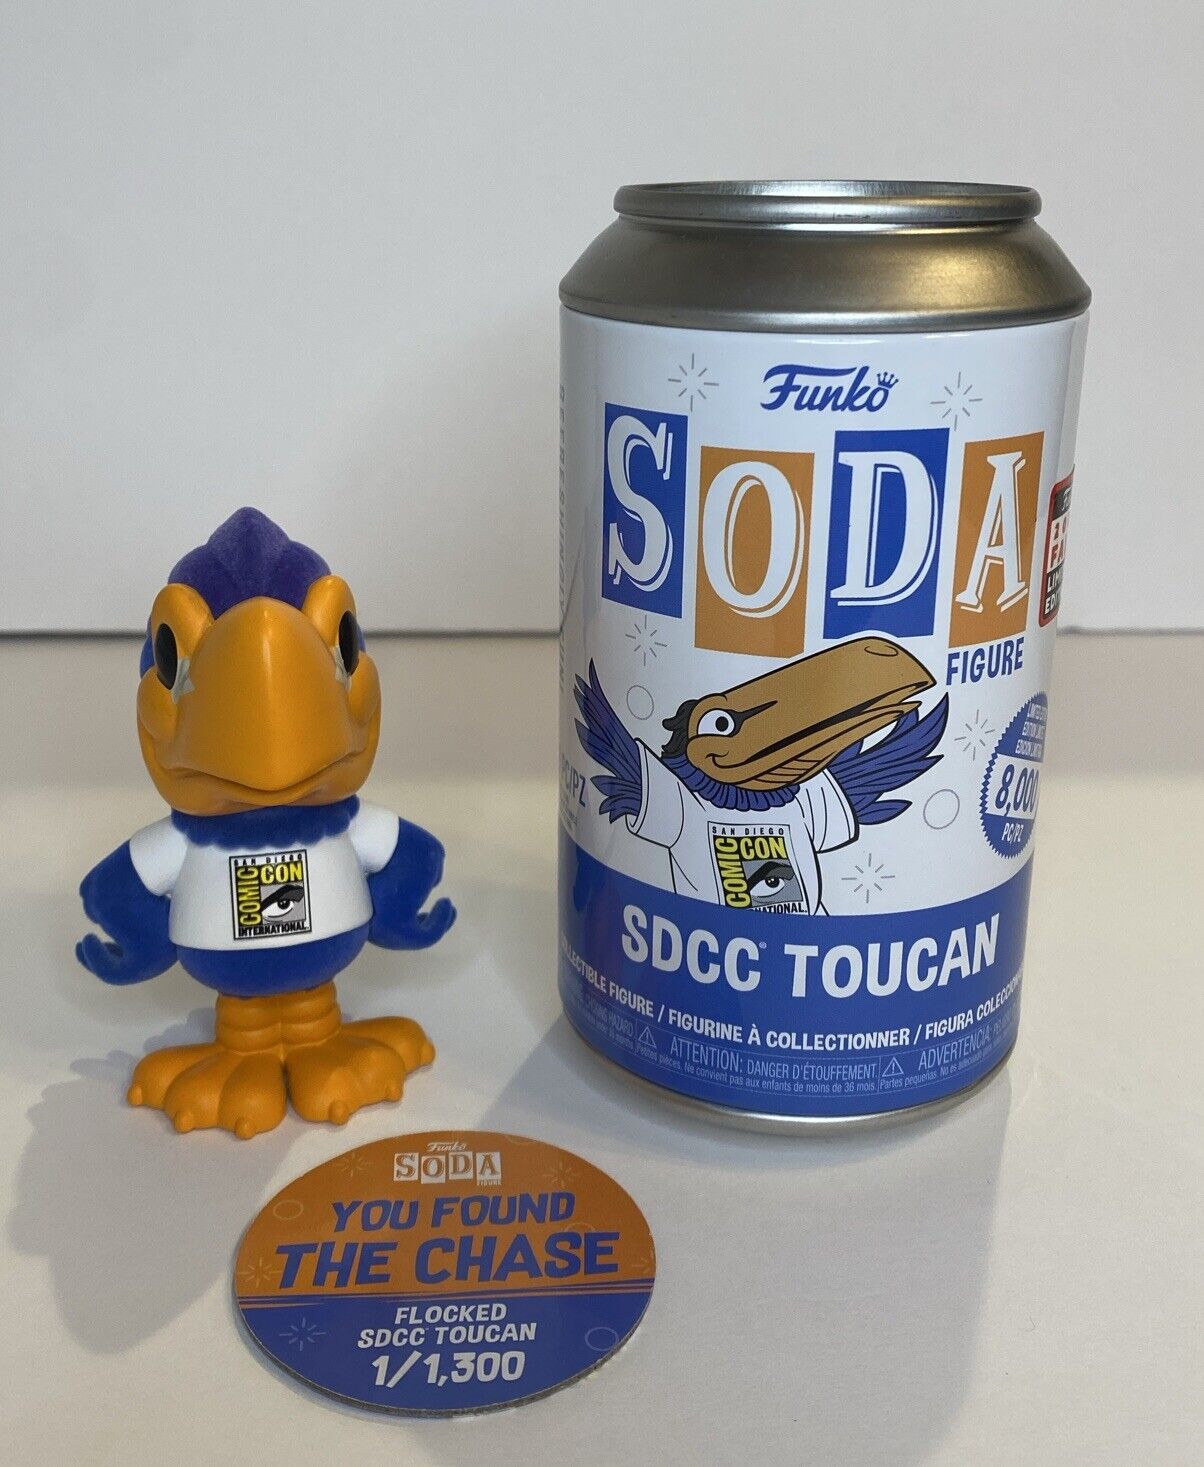 Funko Soda Vinyl Figure LE Chase SDCC Toucan Fall Convention Exclusive Flocked